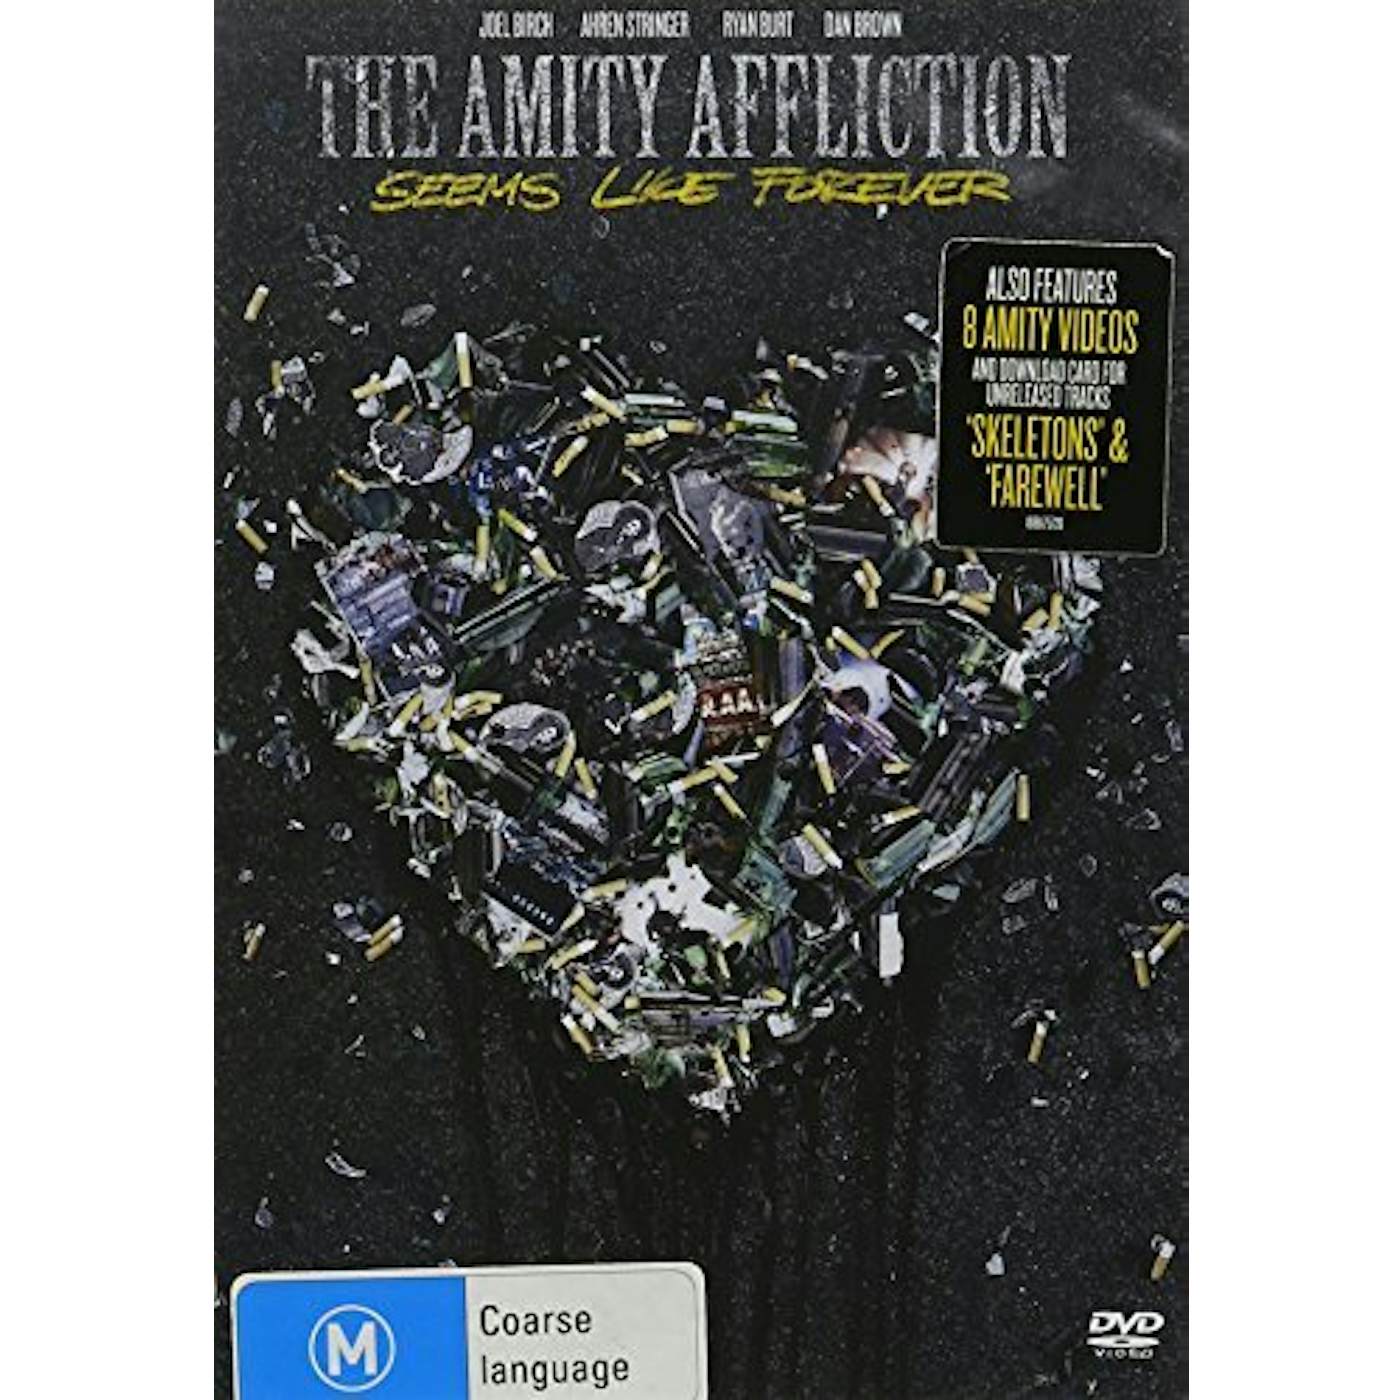 The Amity Affliction SEEMS LIKE FOREVER DVD